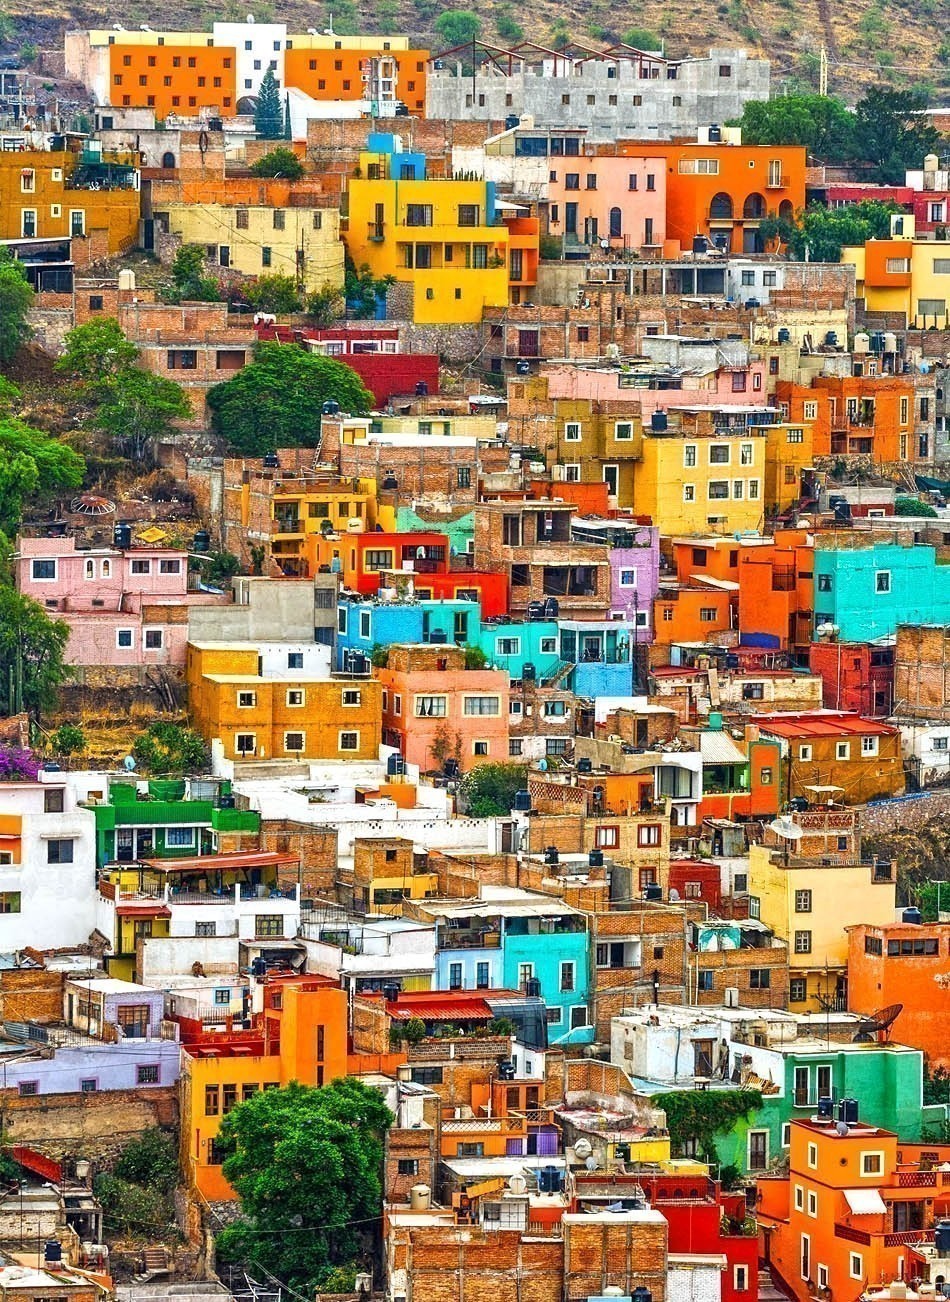 Colorful Houses of Guanajuato, Mexico | 10 of the Most Colorful Cities in the World